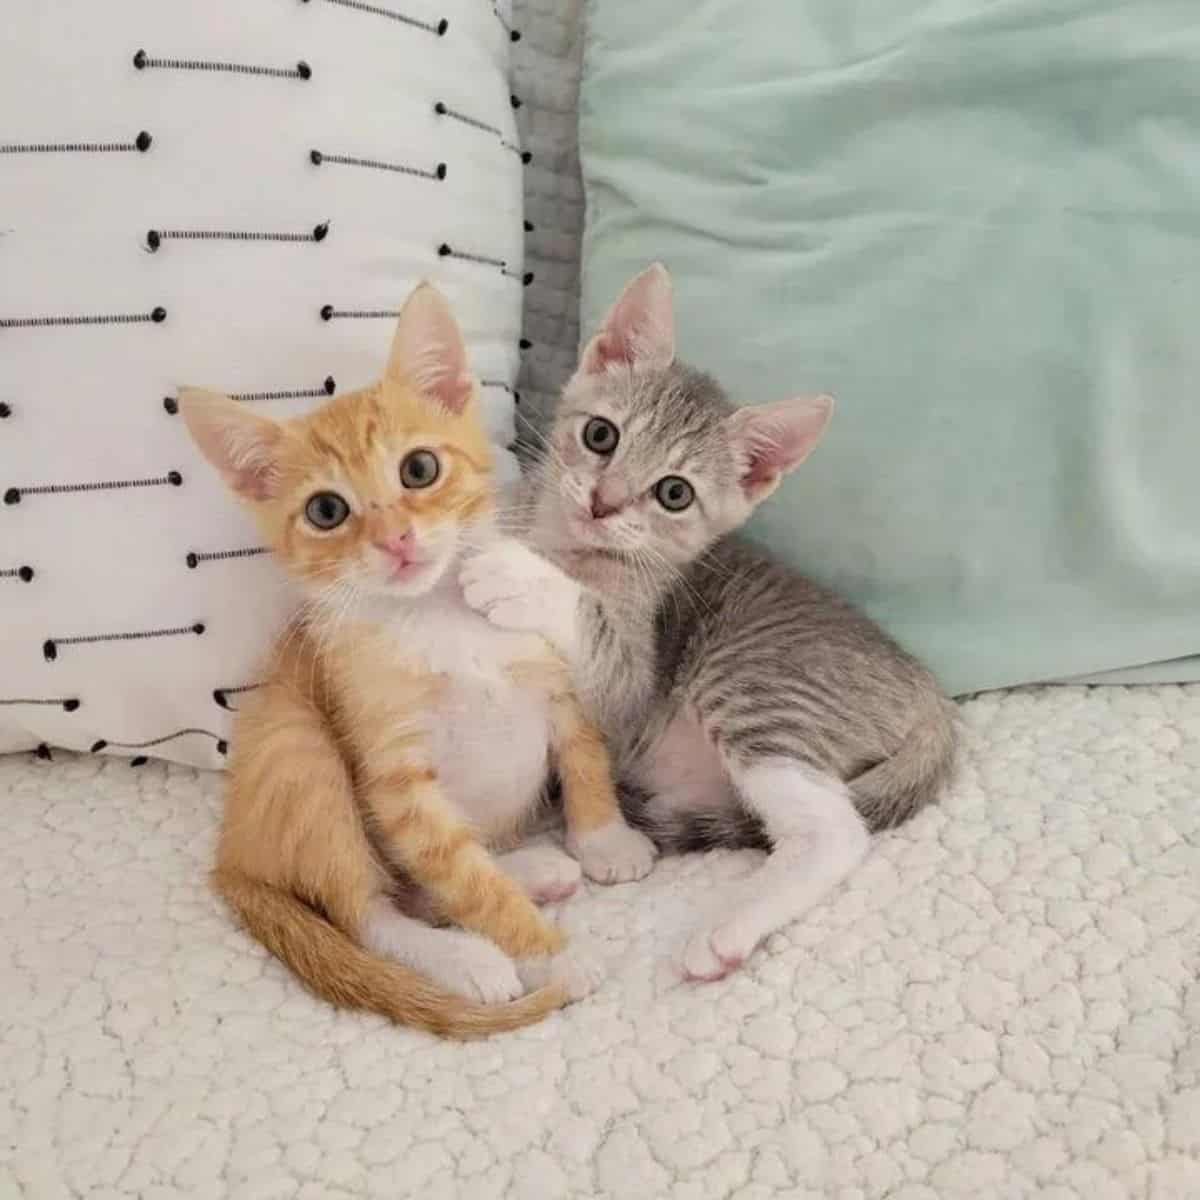 the gray kitten rested its paw on the yellow kitten